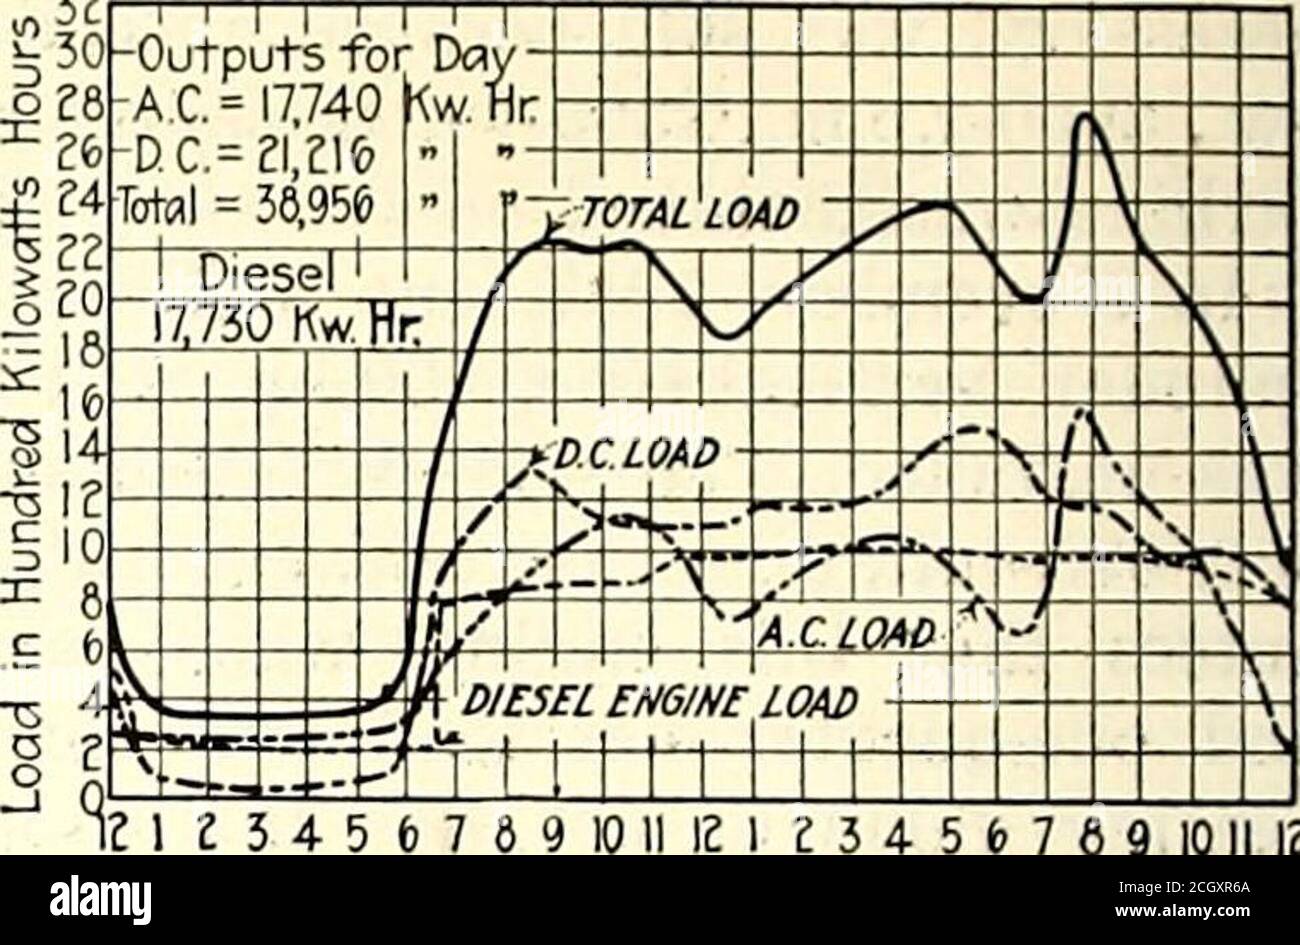 . Electric railway journal . ,5? : 30-Outputs for Day--AC. = 17,740 Kw.rlr -nc.=aw6 I Total = 38,956T. I 3 4 5 t) 7 8 9 10A.M. TYPICAL, LOAD CURVES FOR 1917, 1918 AND 1919, SHOWING OPERATION OF DIESEL ENGINES plant. The pumps are of the vertical, centrifugal type,direct-connected to motors and located in the wells closeto the water level. From the supply tanks the waterpasses by gravity to the jackets on the engine-cylinders,exhaust valves and air compressors and drains to atank in the basement of the engine room. Thence bymeans of a small, horizontal, motor-driven pump, ap-proximately 100 gal Stock Photo